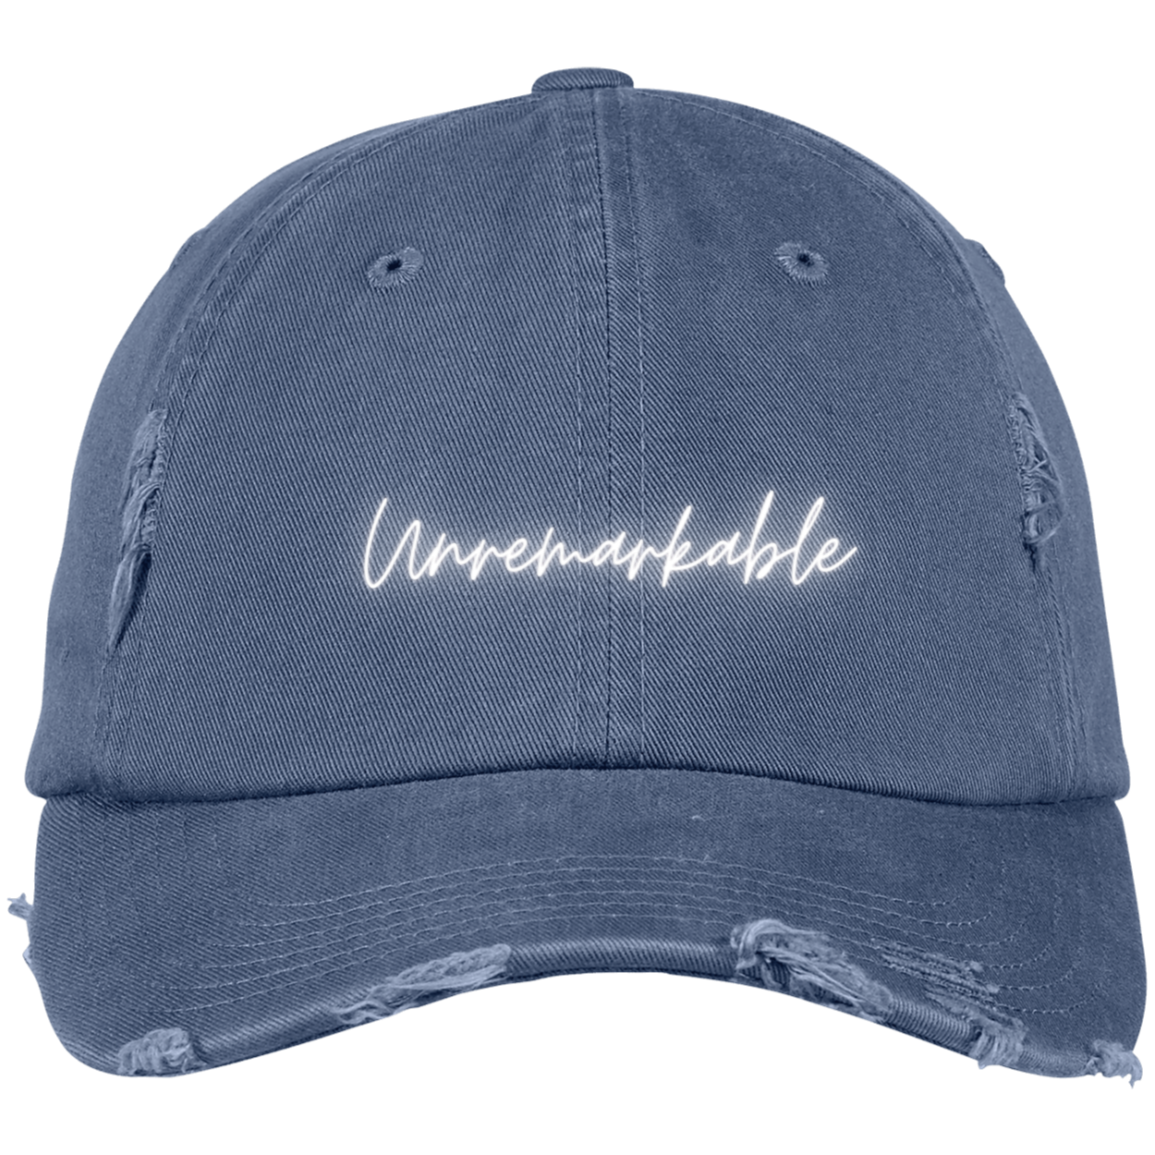 Unremarkable Embroidered Distressed Dad Cap